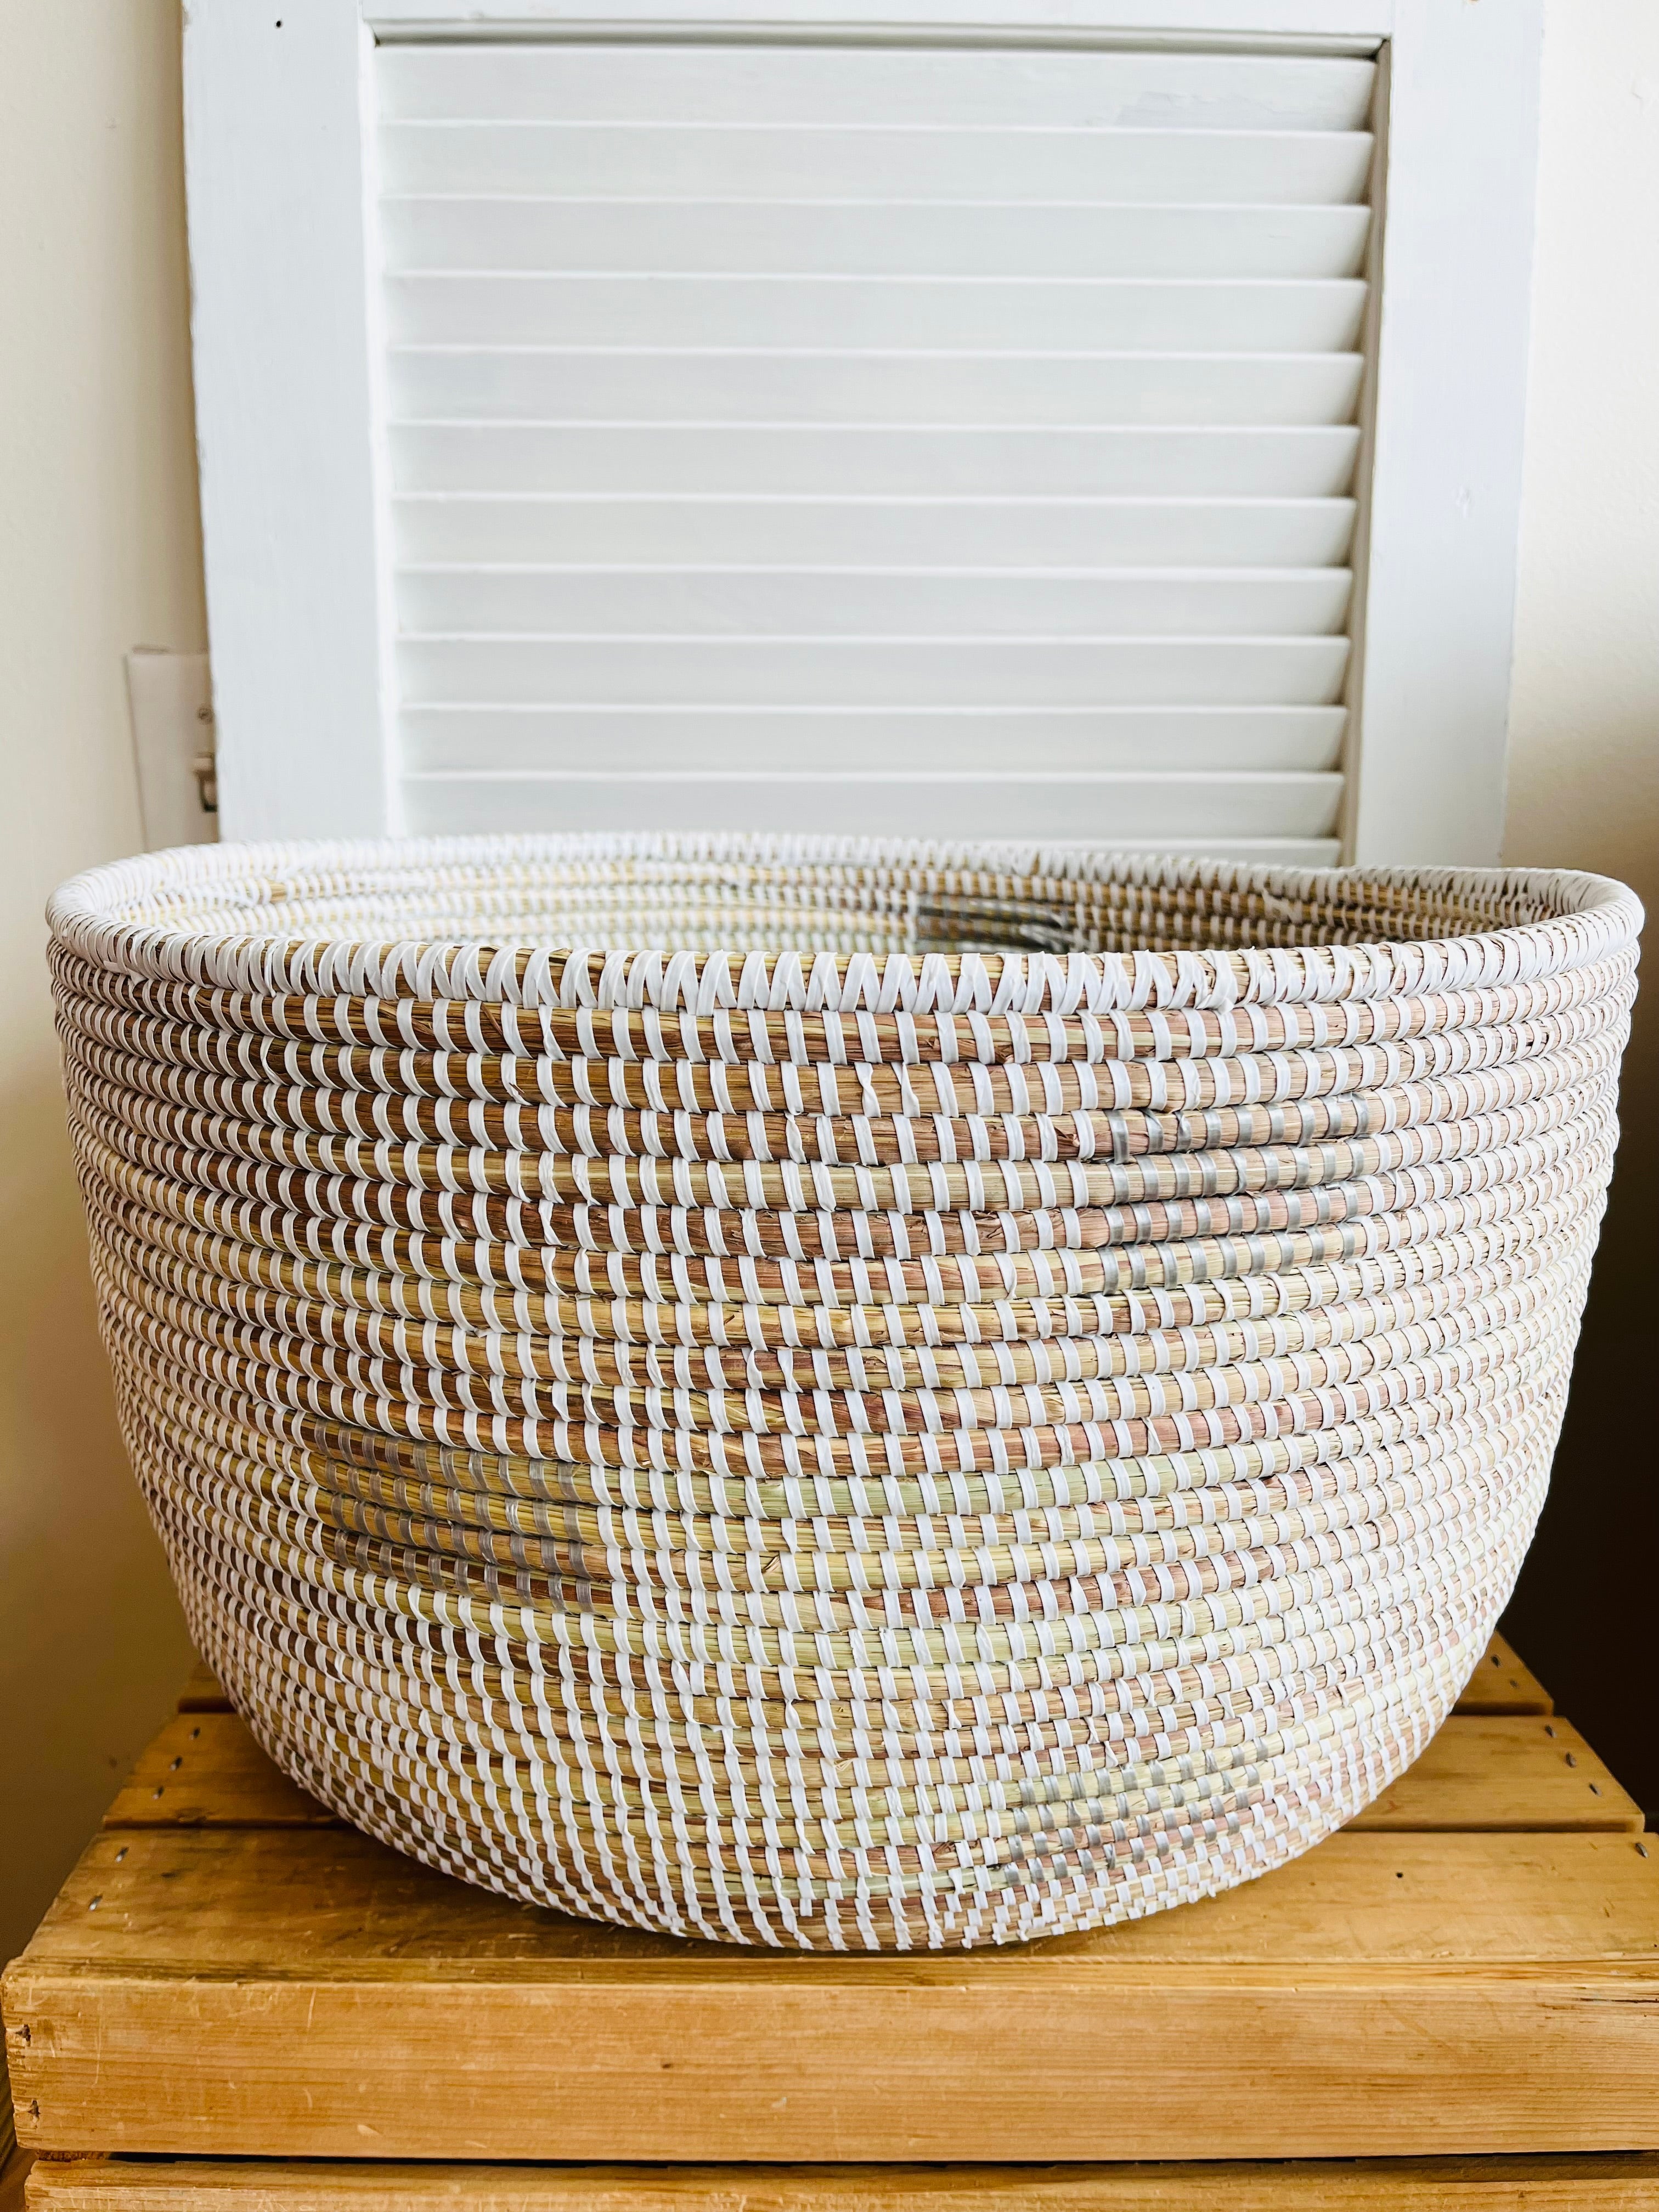 Large White with Silver Dots - Prismatic Pixels - Oval basket